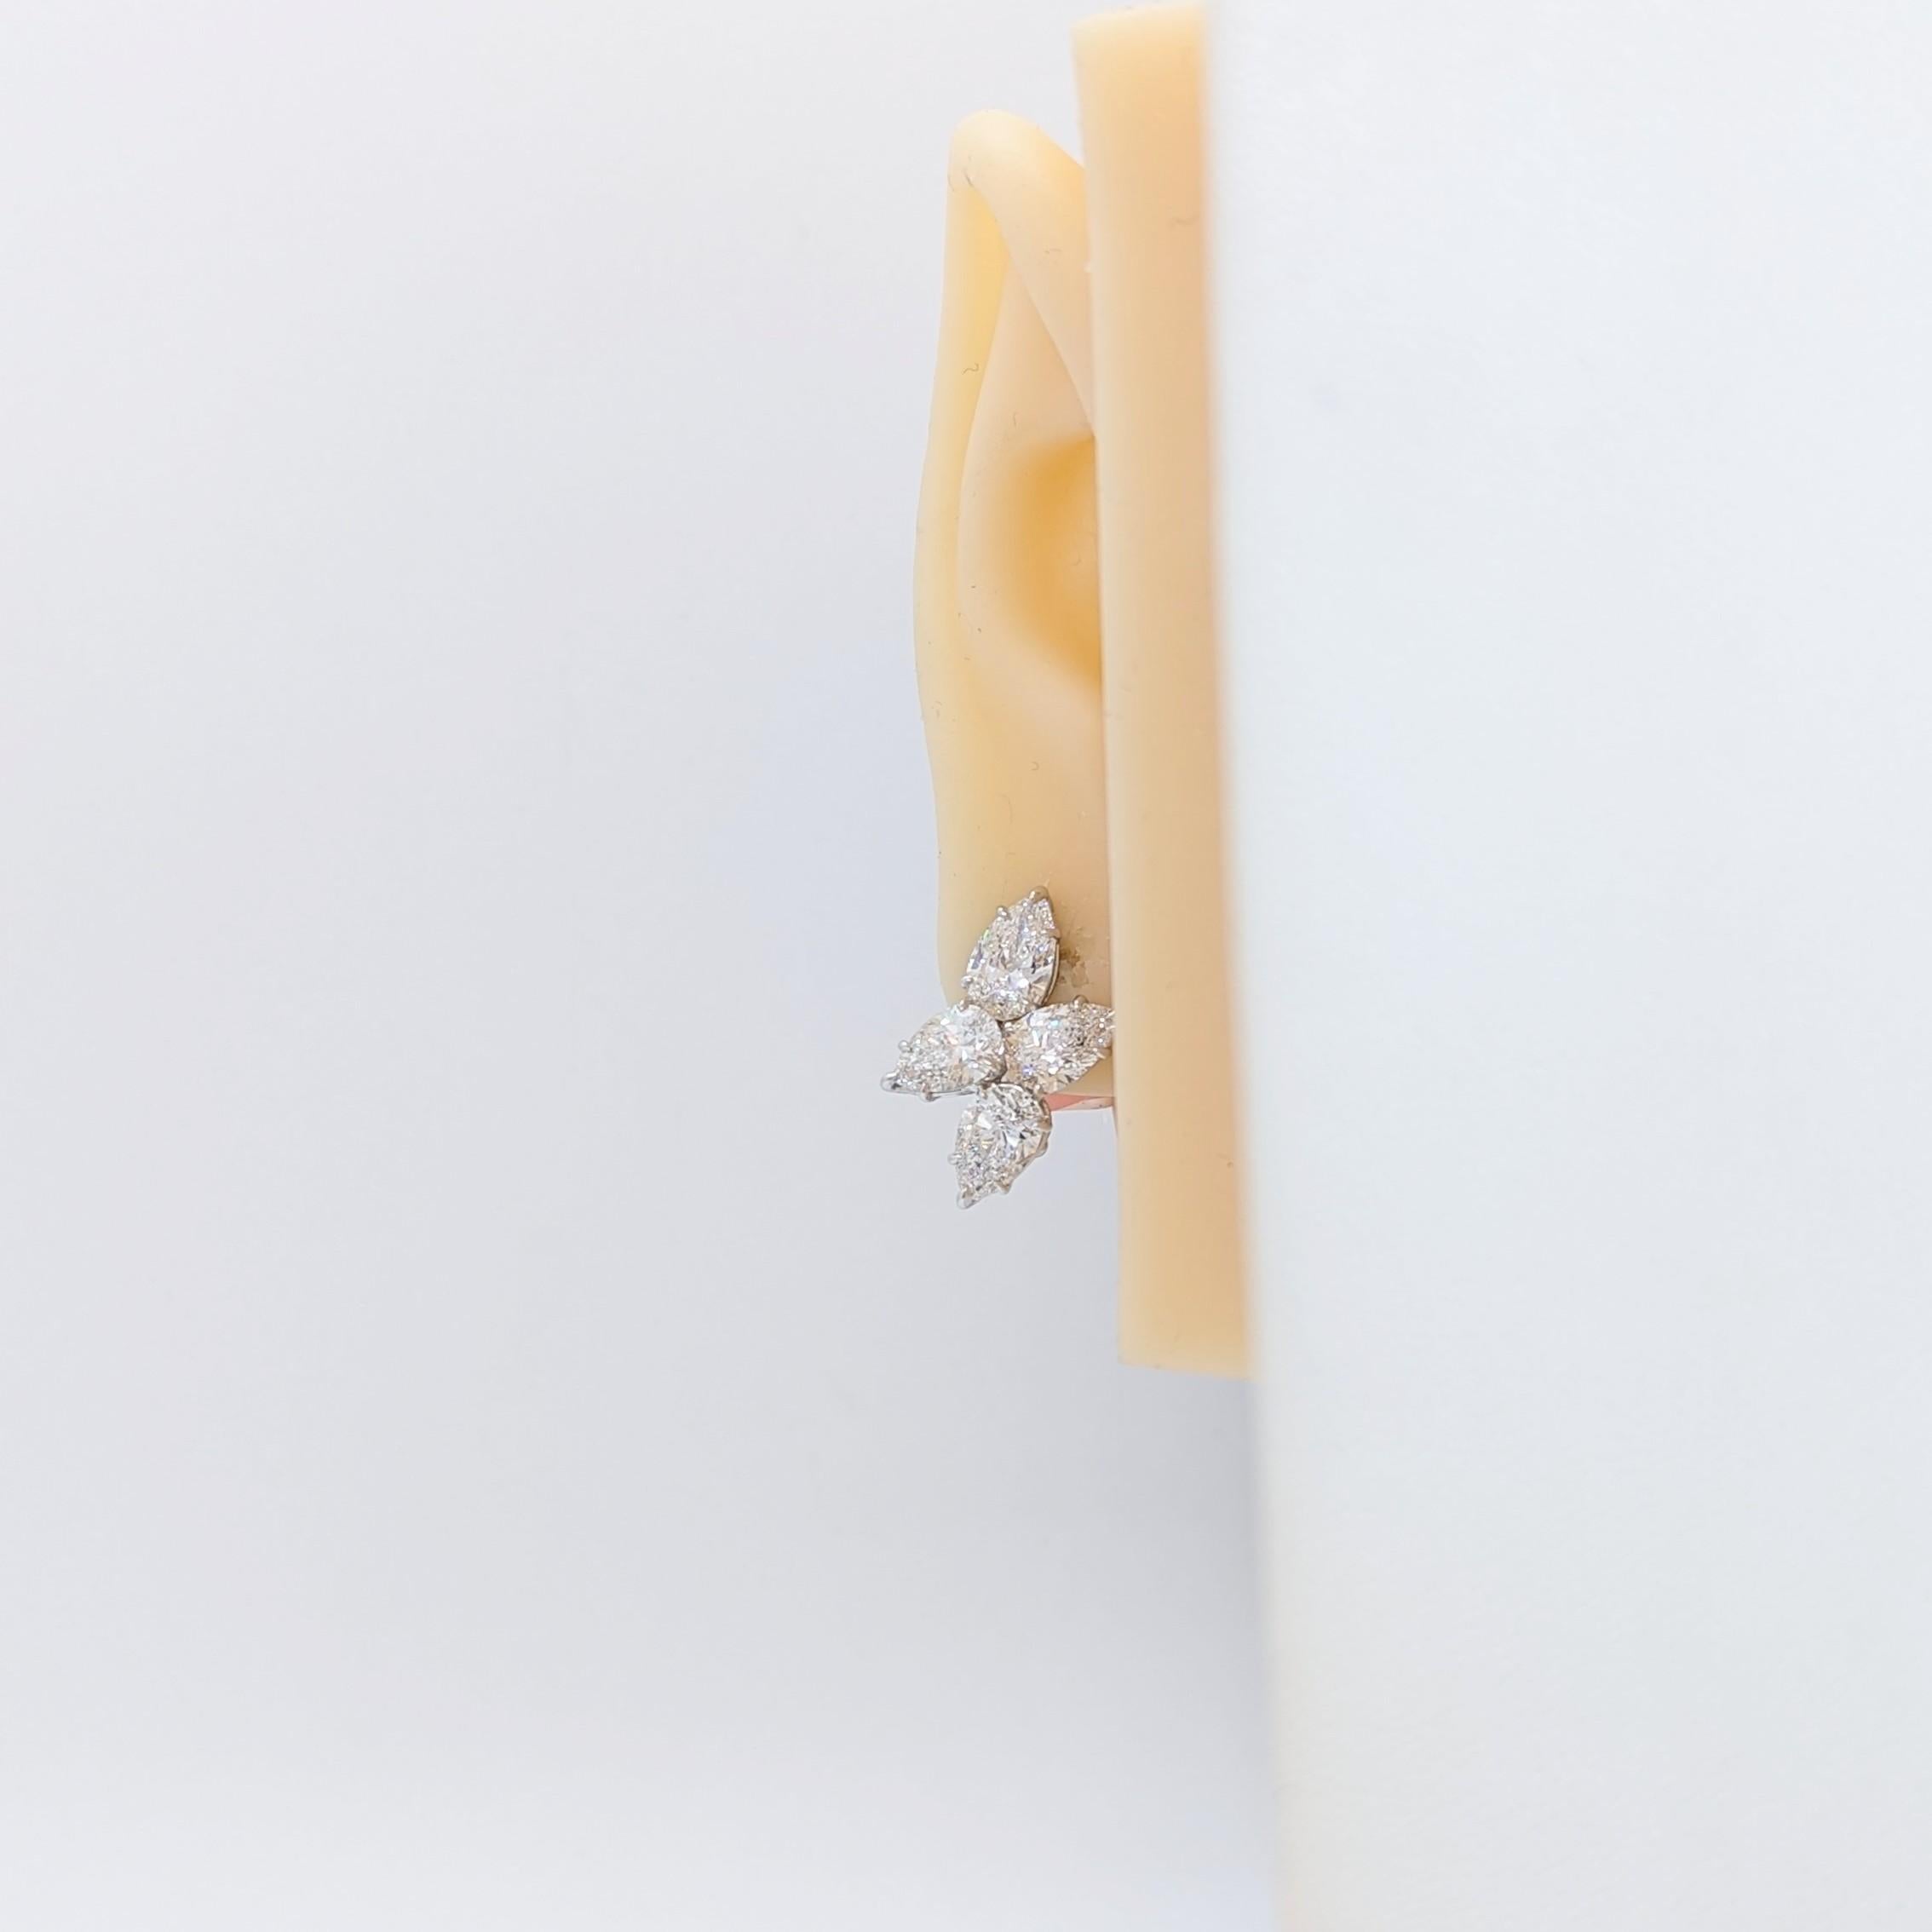 Gorgeous 7.88 ct. DEF SI1-SI2 white diamond pear shapes in a cluster design.  Handmade in 18k white gold.  